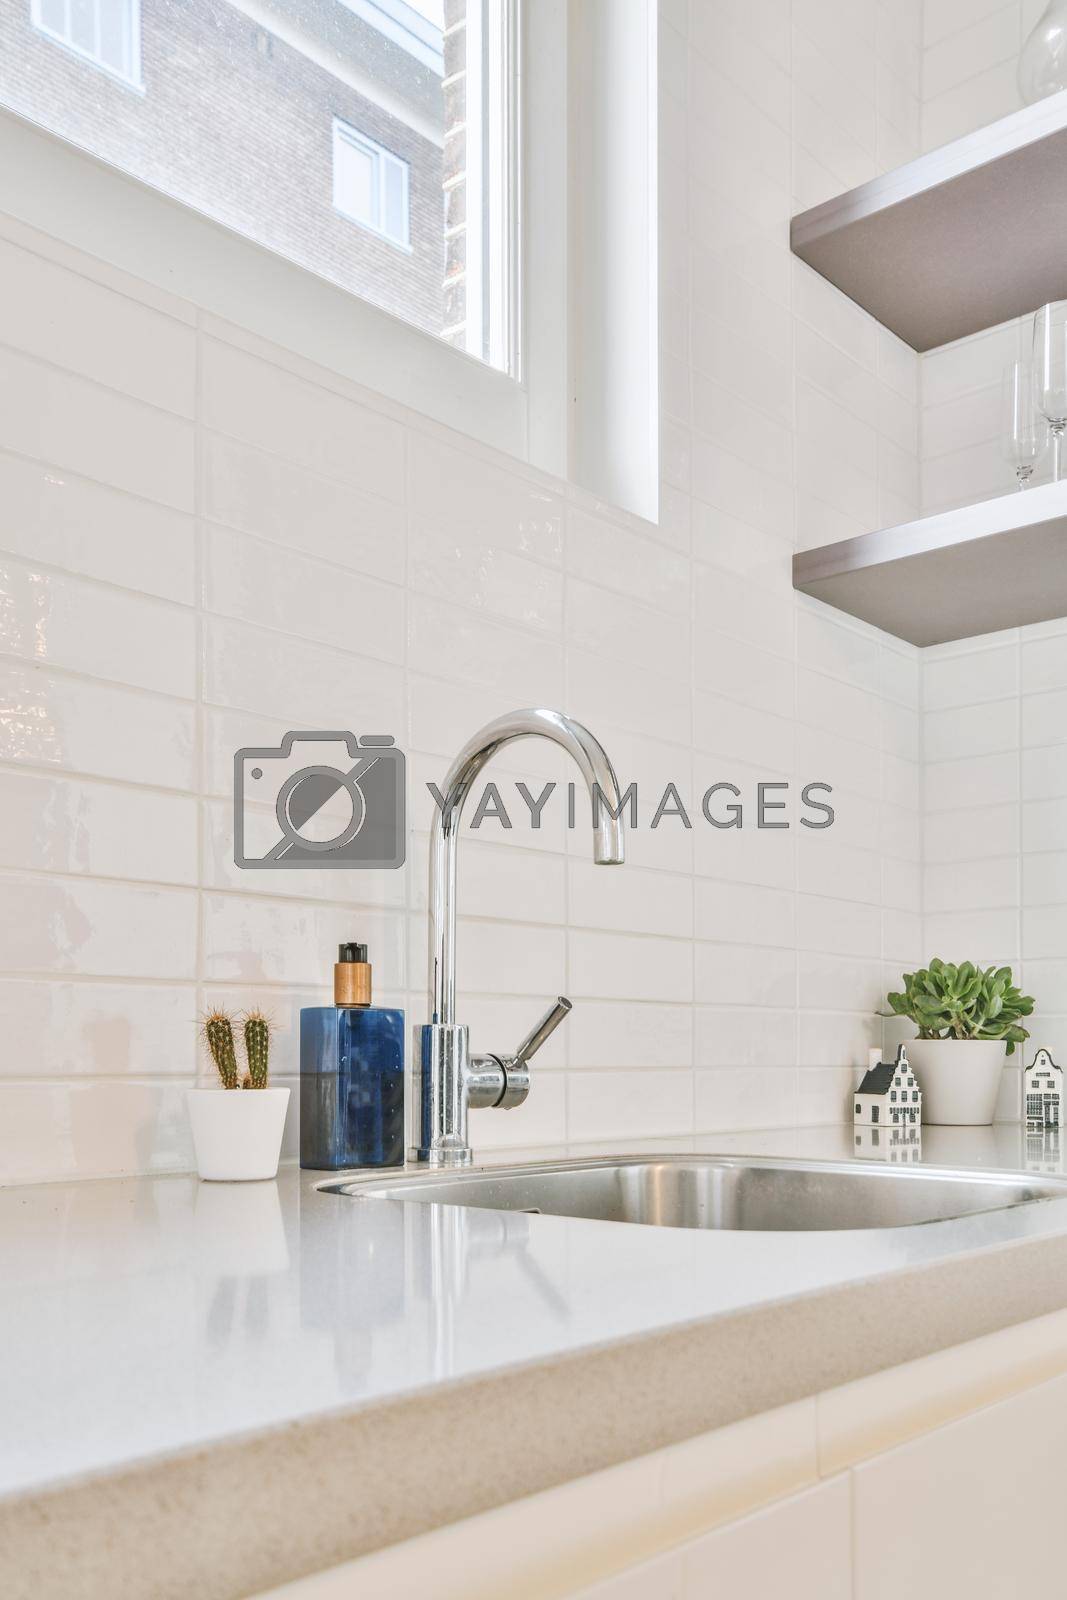 Royalty free image of Kitchen faucet close-up on a marble countertop by casamedia